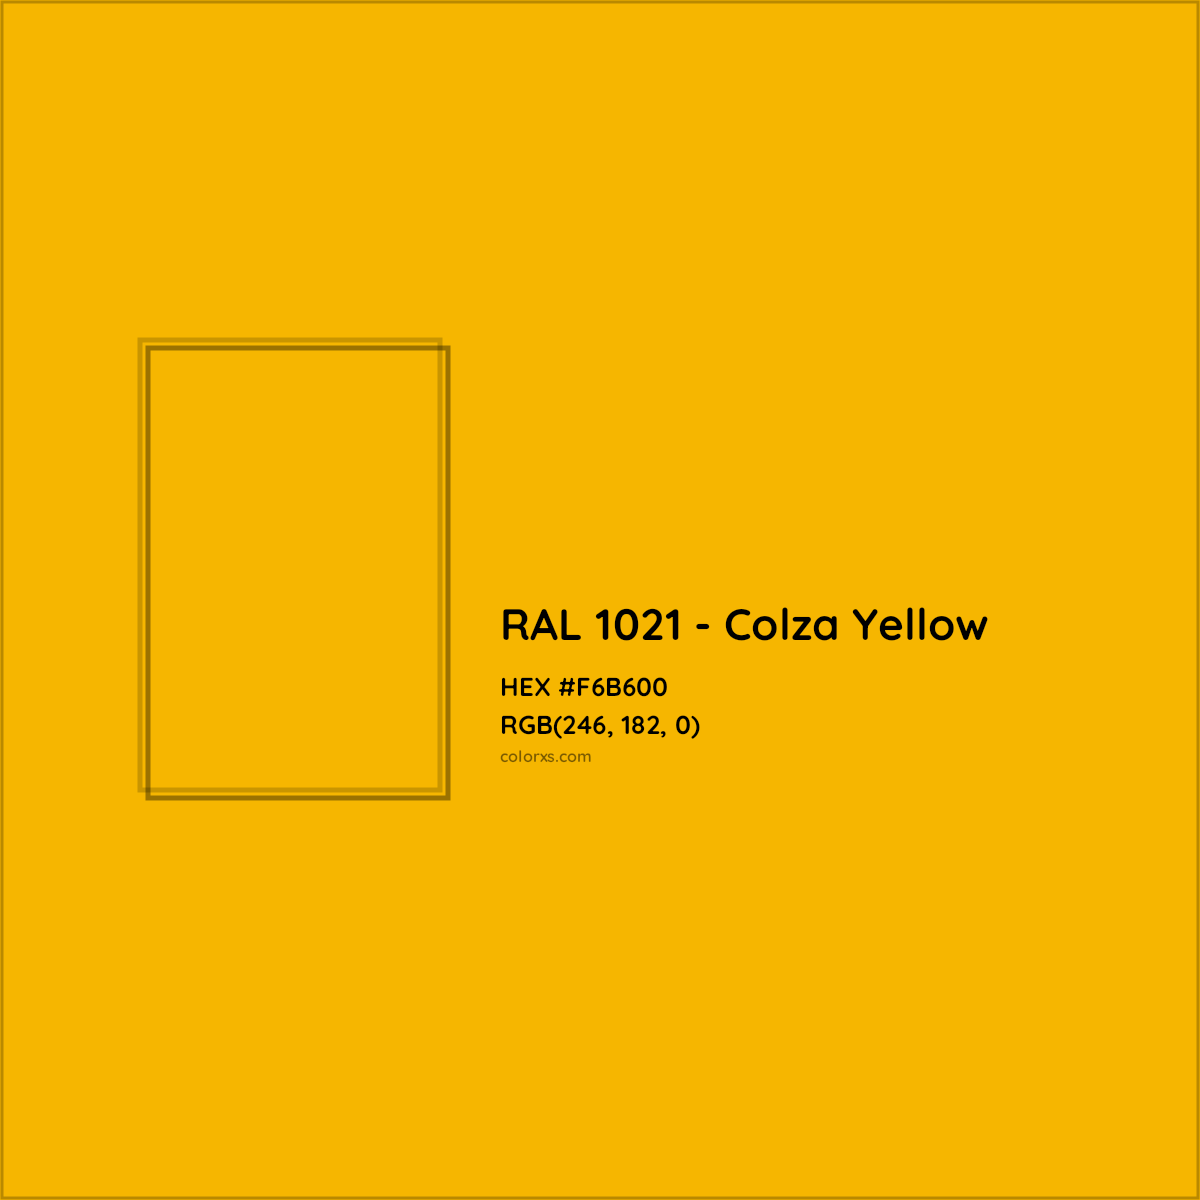 HEX #F6B600 RAL 1021 - Colza Yellow CMS RAL Classic - Color Code